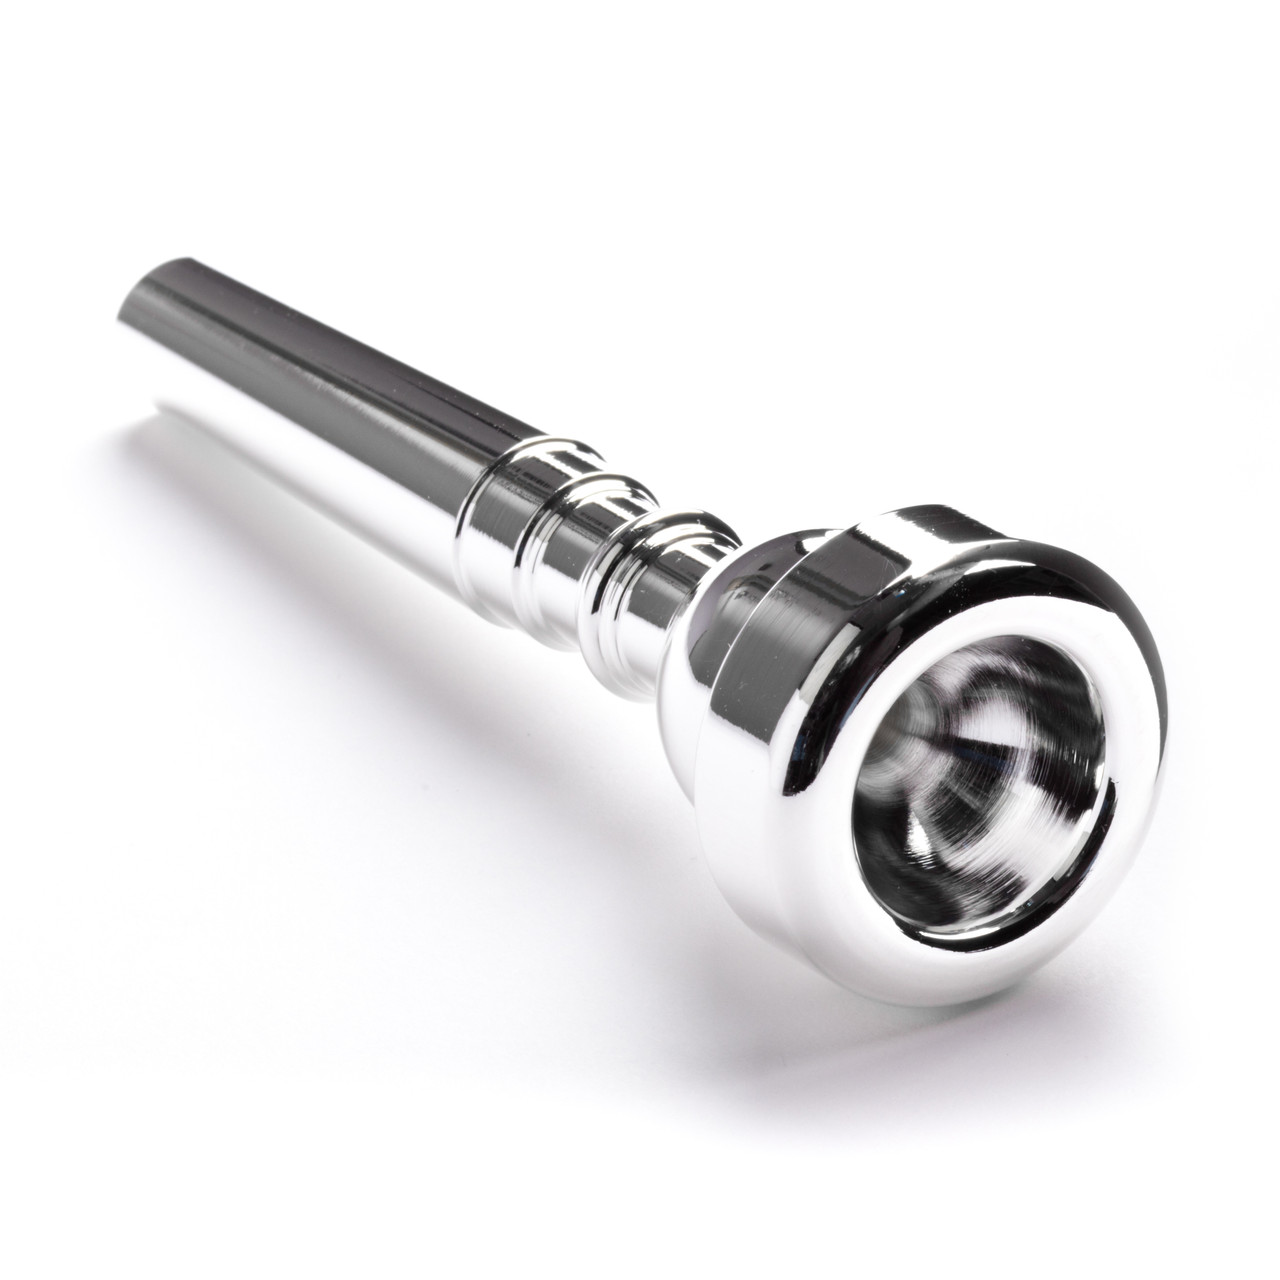 HERCO CHROME PLATED TRUMPET MOUTHPIECE - Dunlop